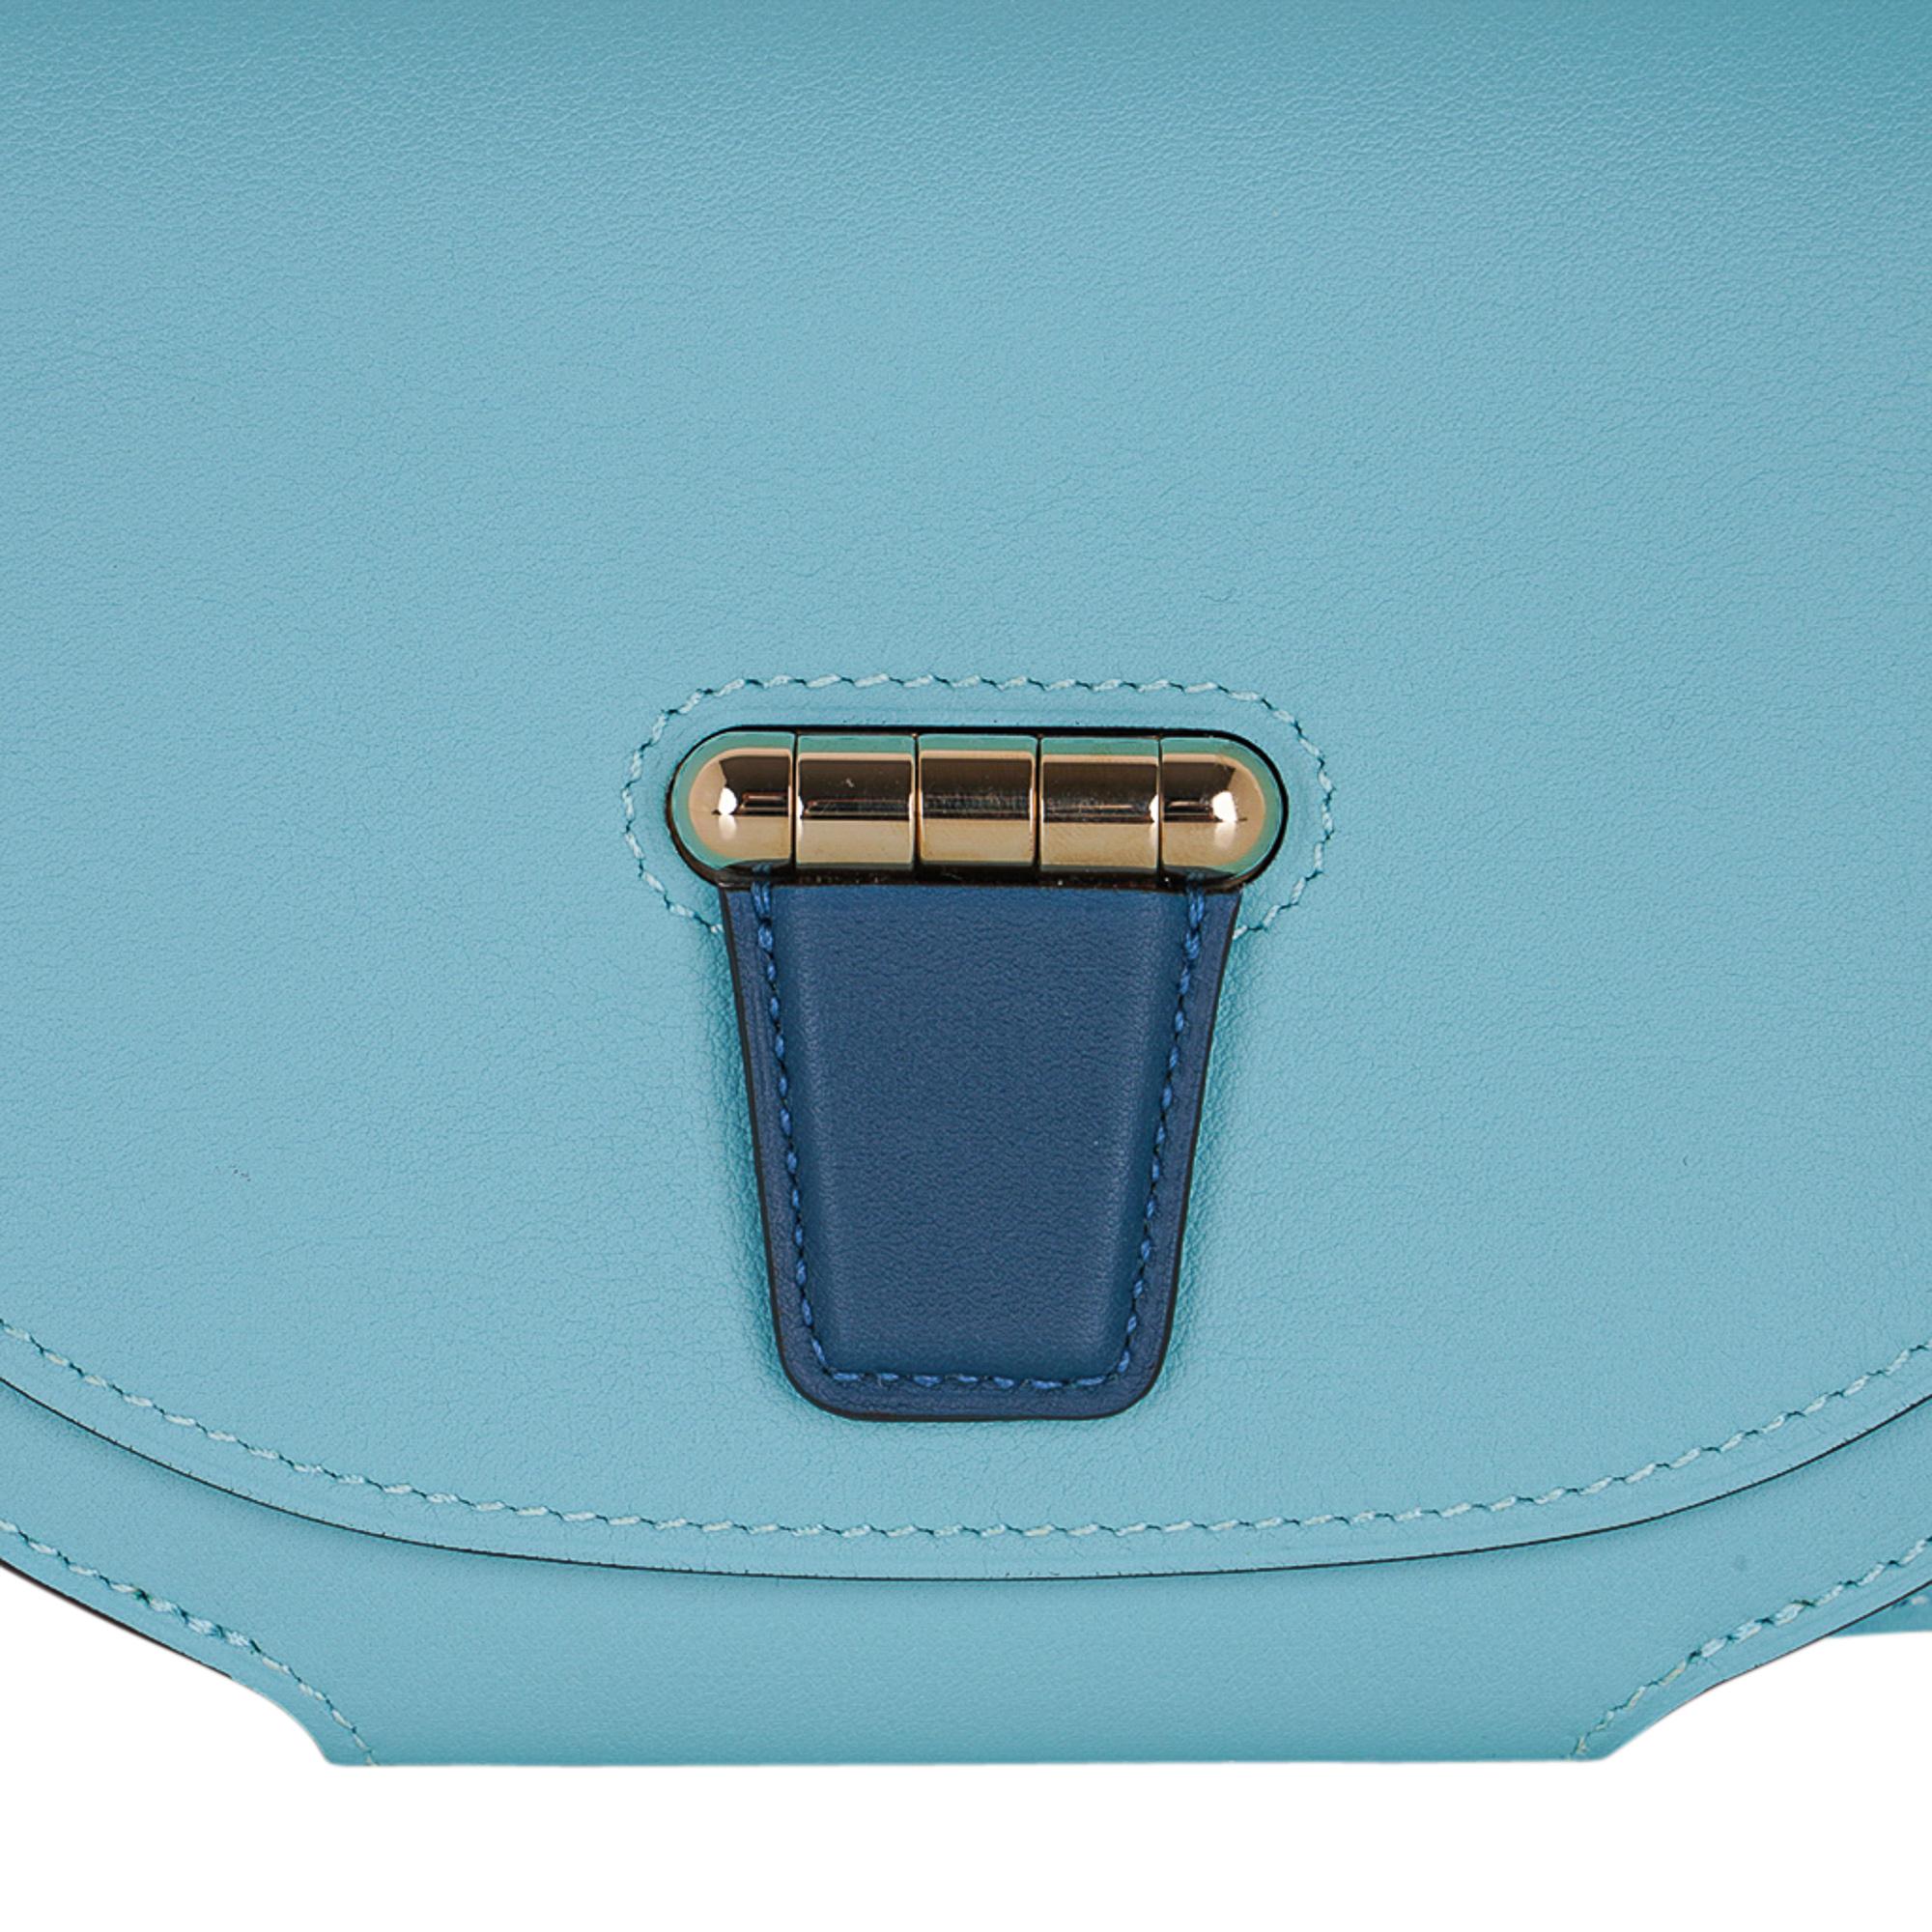 Mightychic offers an Hermes Mini Convoyeur bag featured in Blue Atoll and Blue Colvert.
Lush with Gold hardware and richly saturated Swift leather.
This versatile bag can be worn on shoulder, crossbody, or with removable leather strap, as a